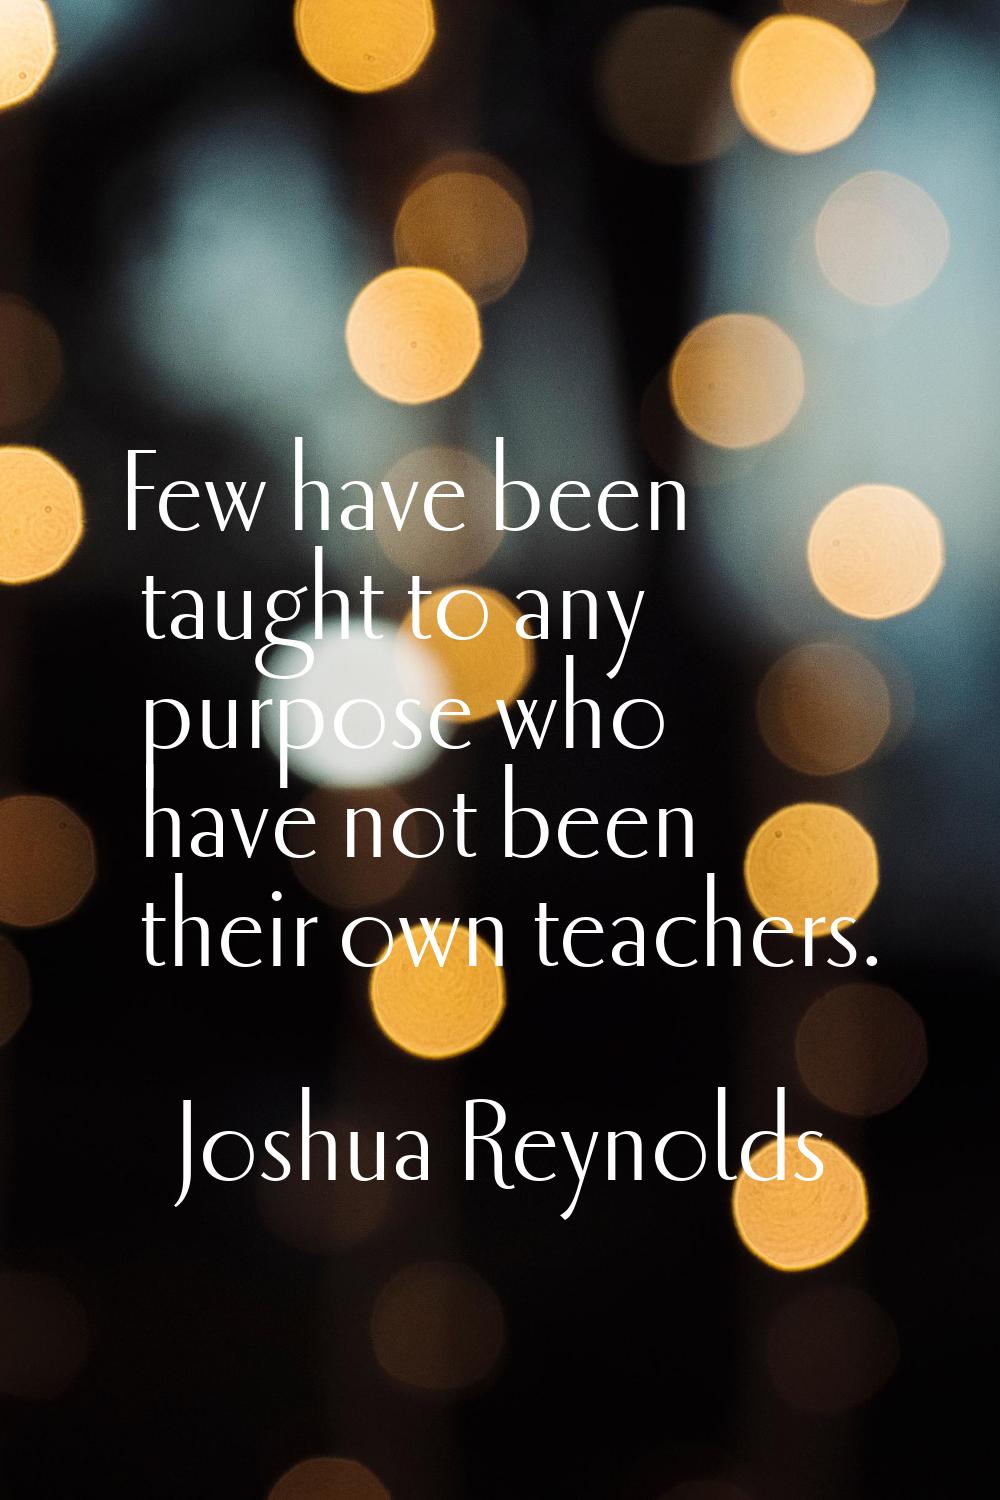 Few have been taught to any purpose who have not been their own teachers.